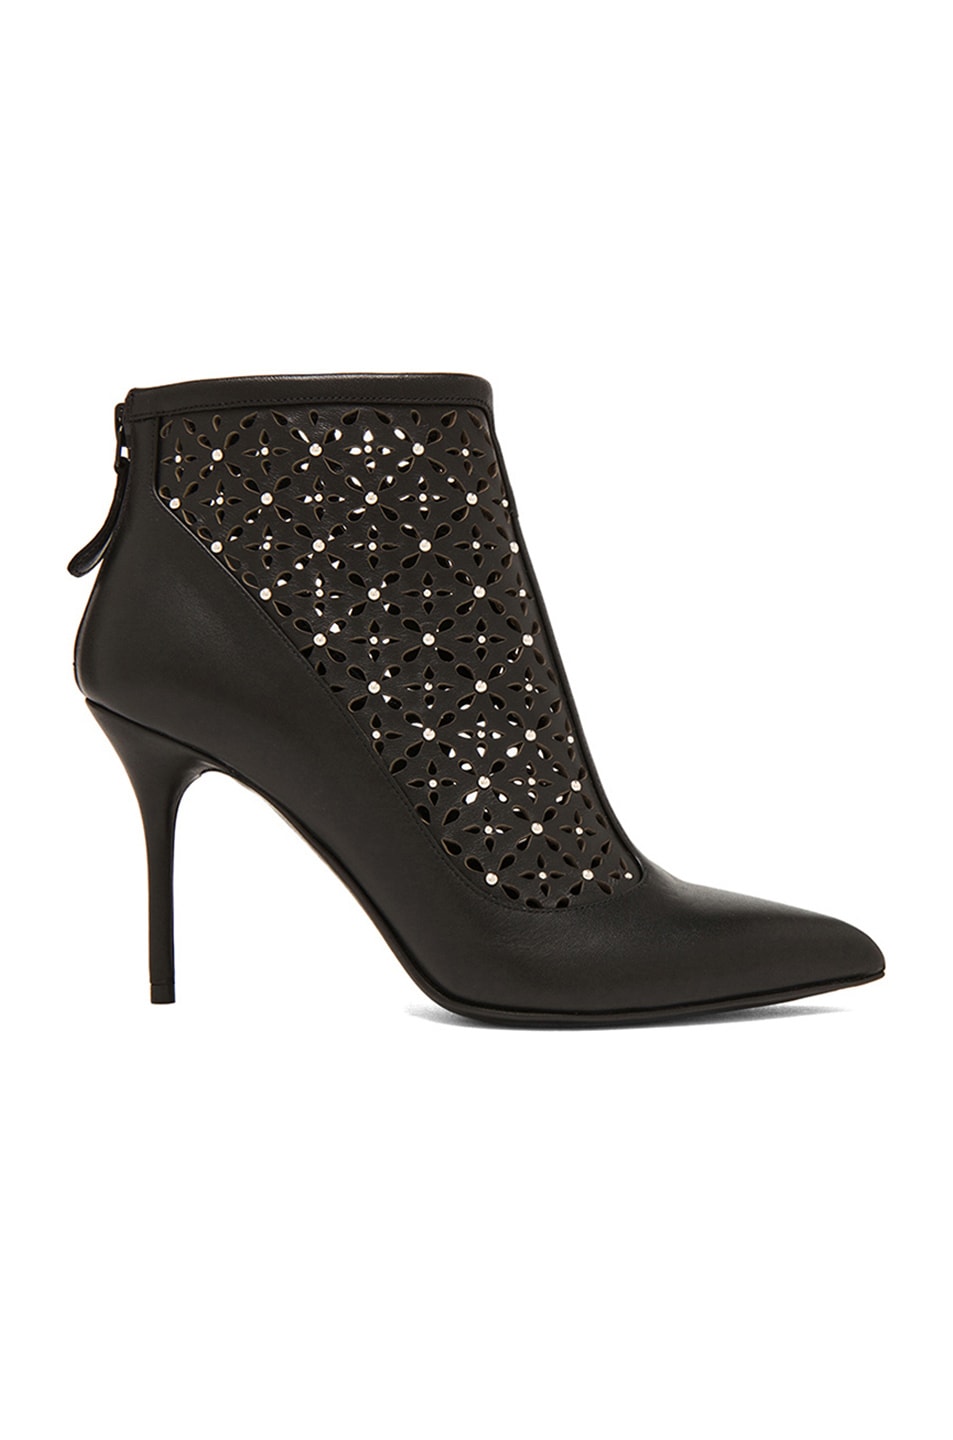 Alexander McQueen Laser Cut Pointy Leather Ankle Boots in Black | FWRD